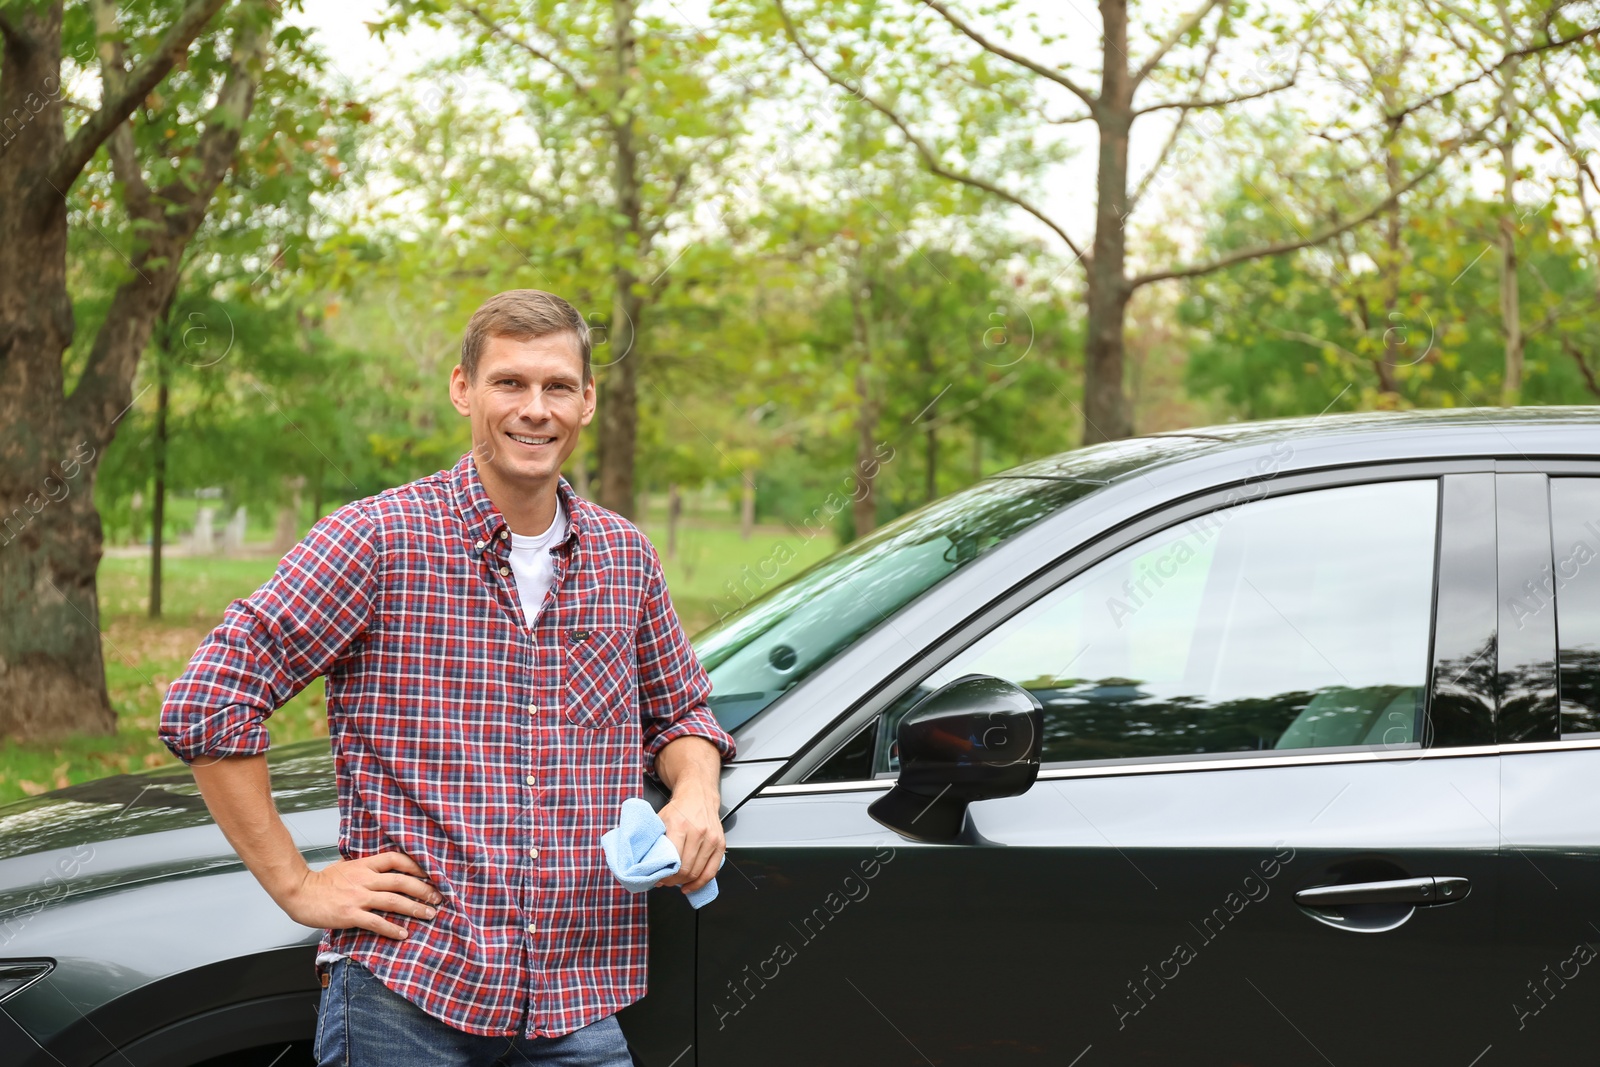 Photo of Man with rug near washed car outdoors